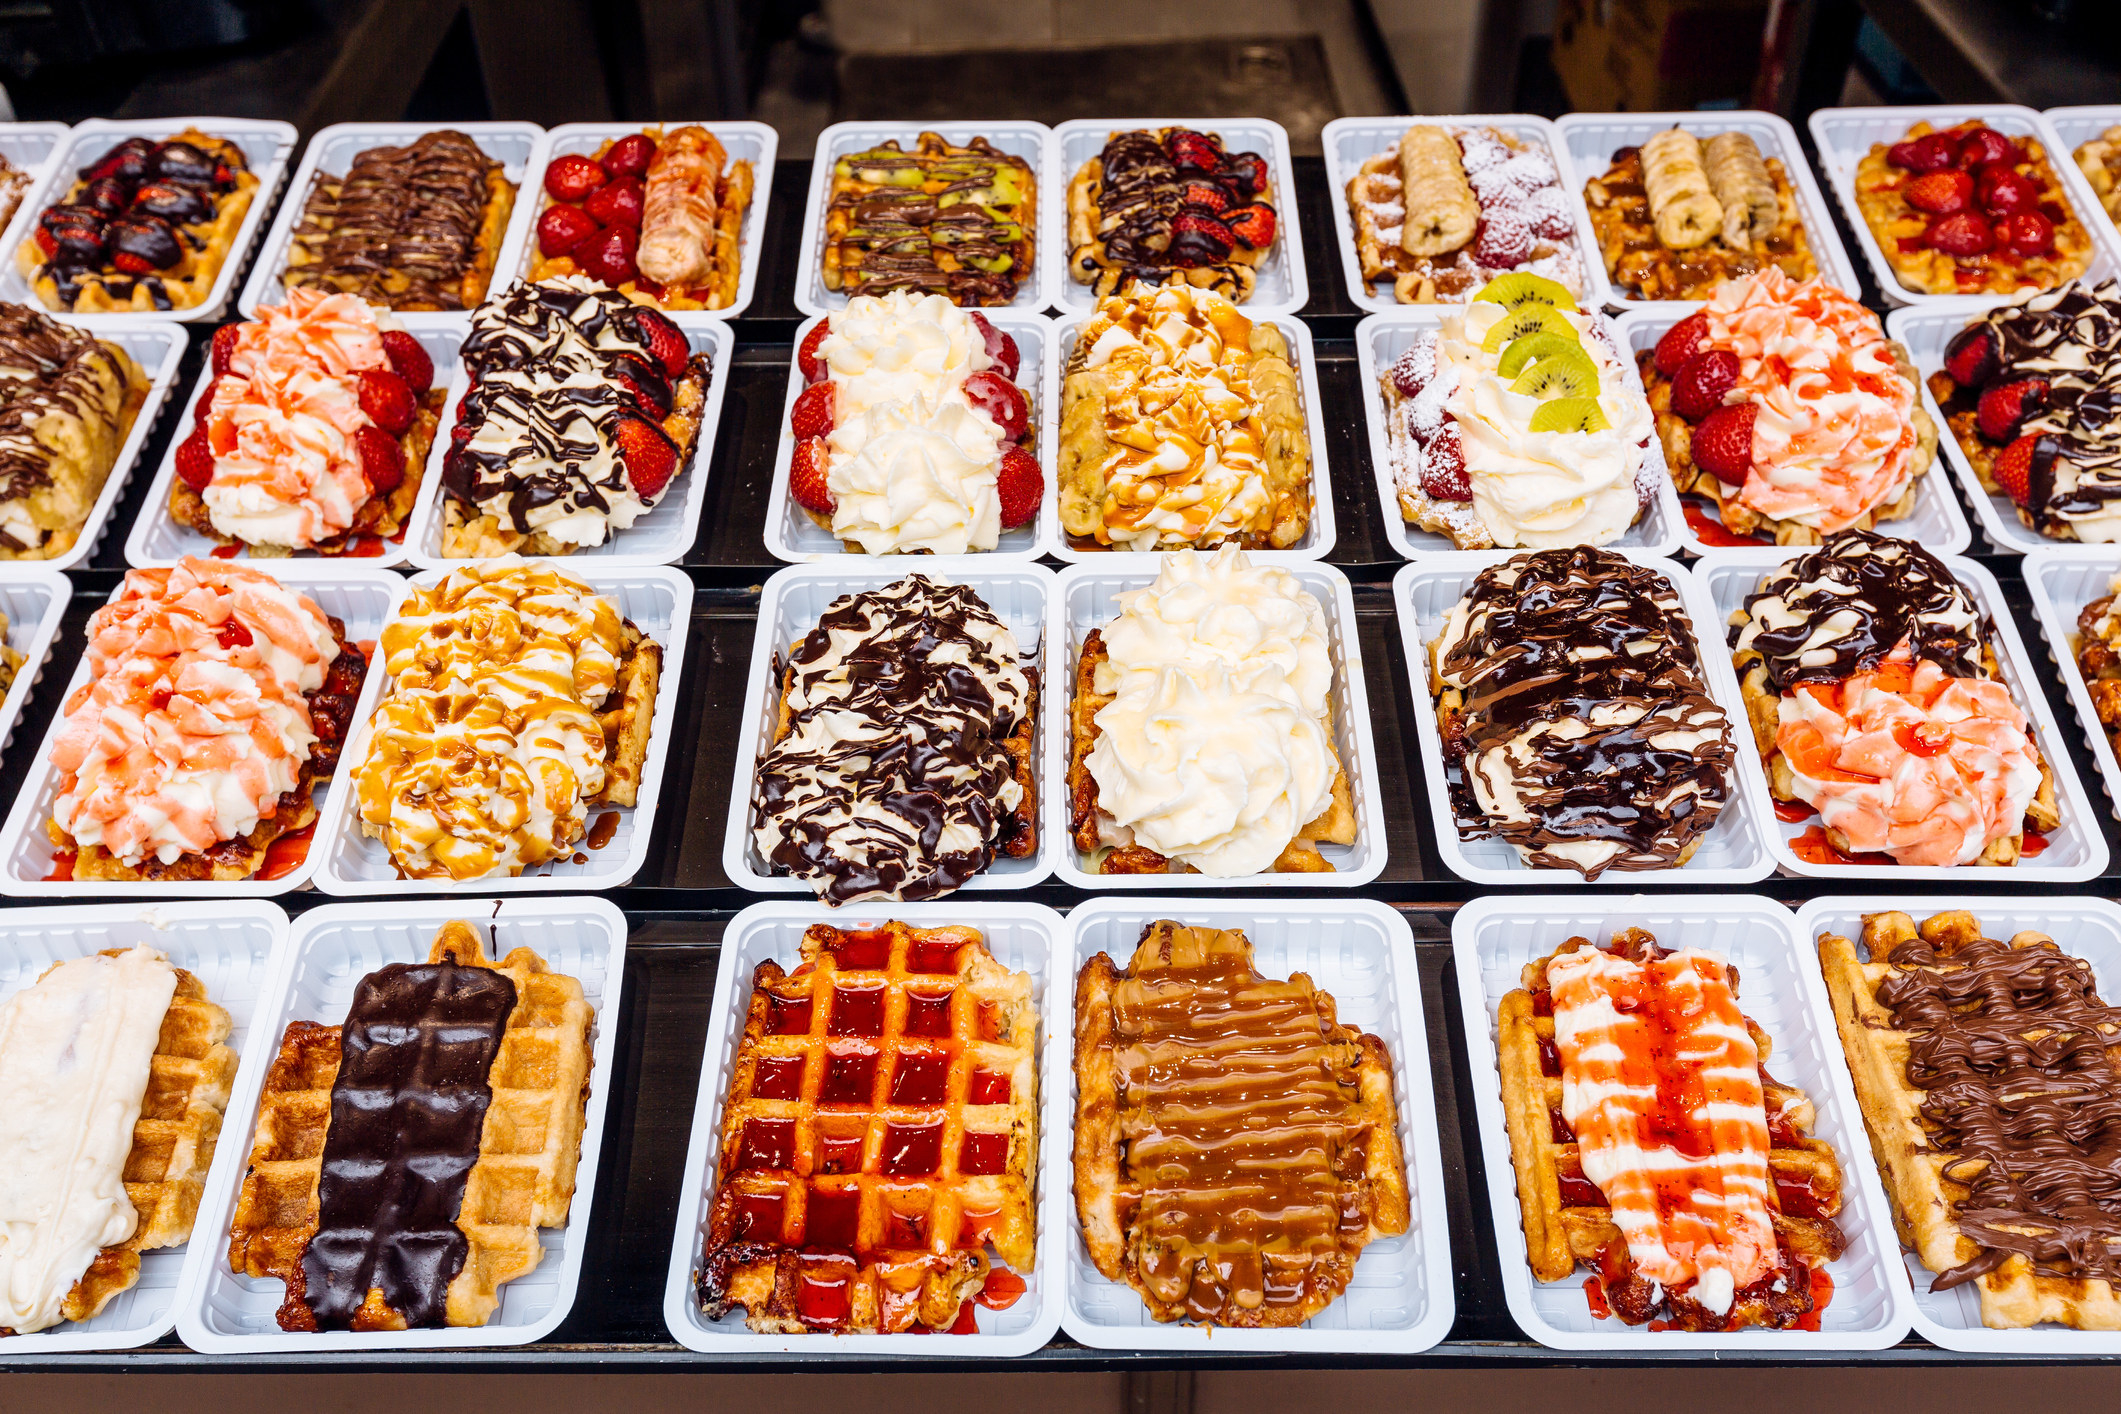 Belgian waffles with various sweet toppings for sale in Brussels.